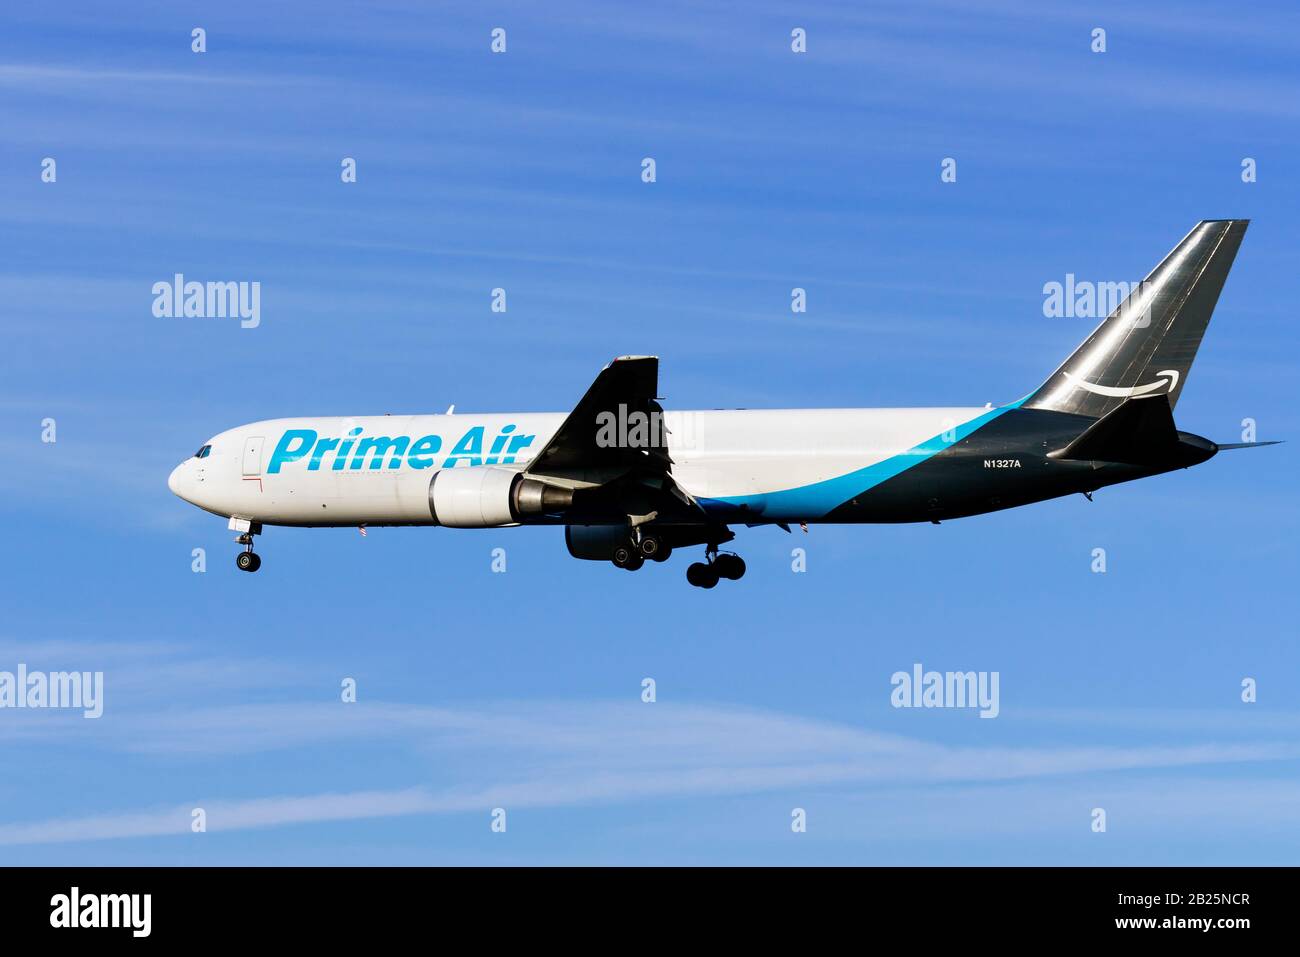 Amazon Prime Air High Resolution Stock Photography and Images - Alamy